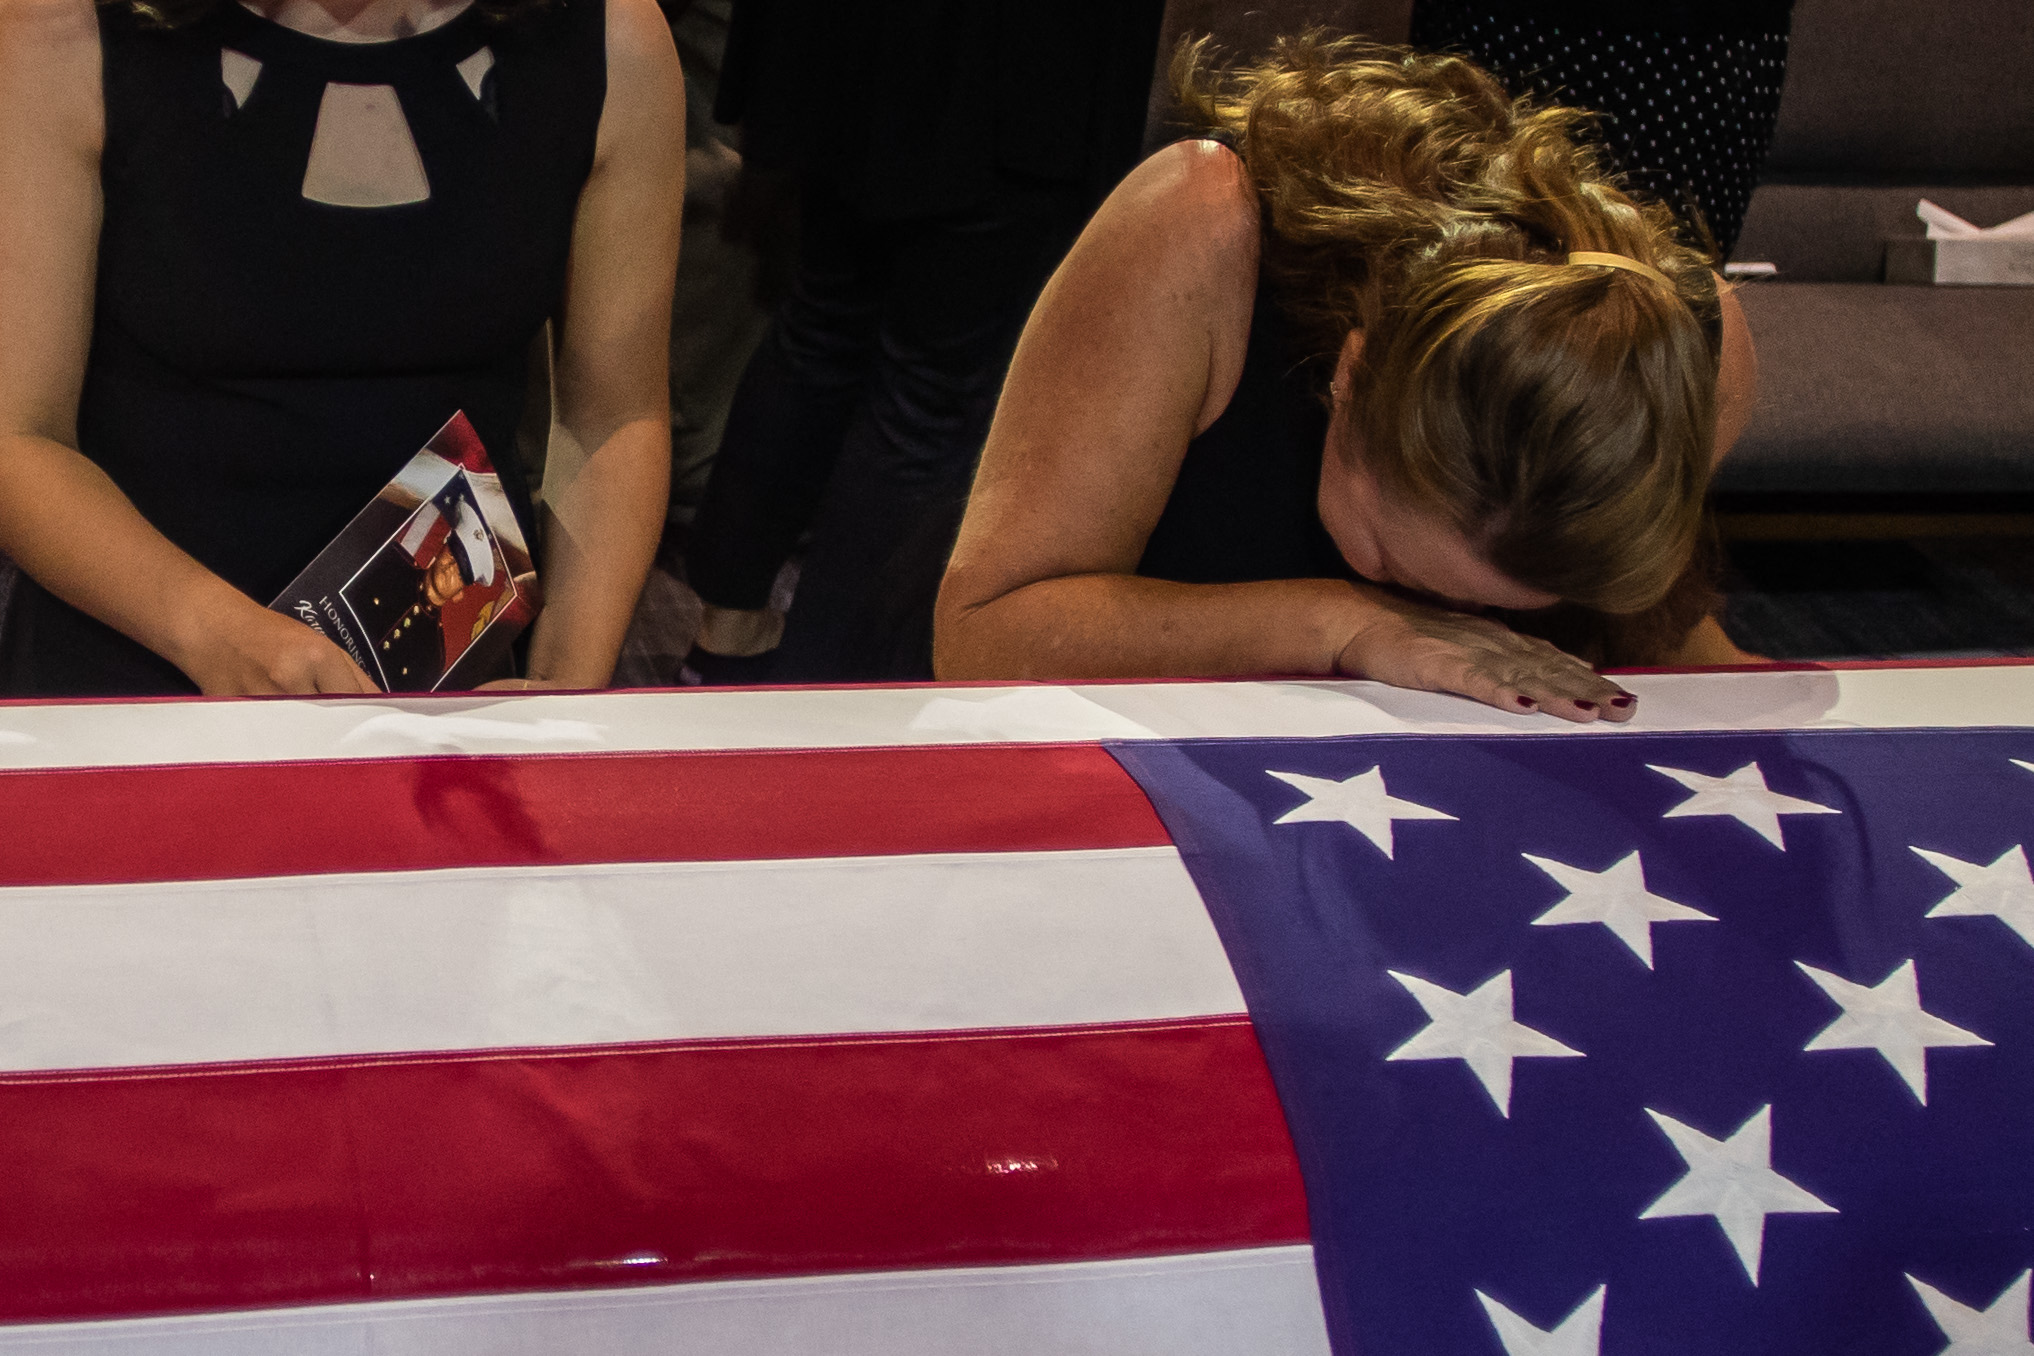 People pay their respects during the funeral of Marine Lance Cpt. Kareem Grant Nikoui at the Harvest Christian Fellowship on September 18, 2021 in Riverside, California. - Nikoui was one of 13 US service members killed in the suicide blast in Kabul during the evacuation of US citizens, and Afghan civilians on August 26. (Photo by Apu GOMES / AFP) (Photo by APU GOMES/AFP via Getty Images)